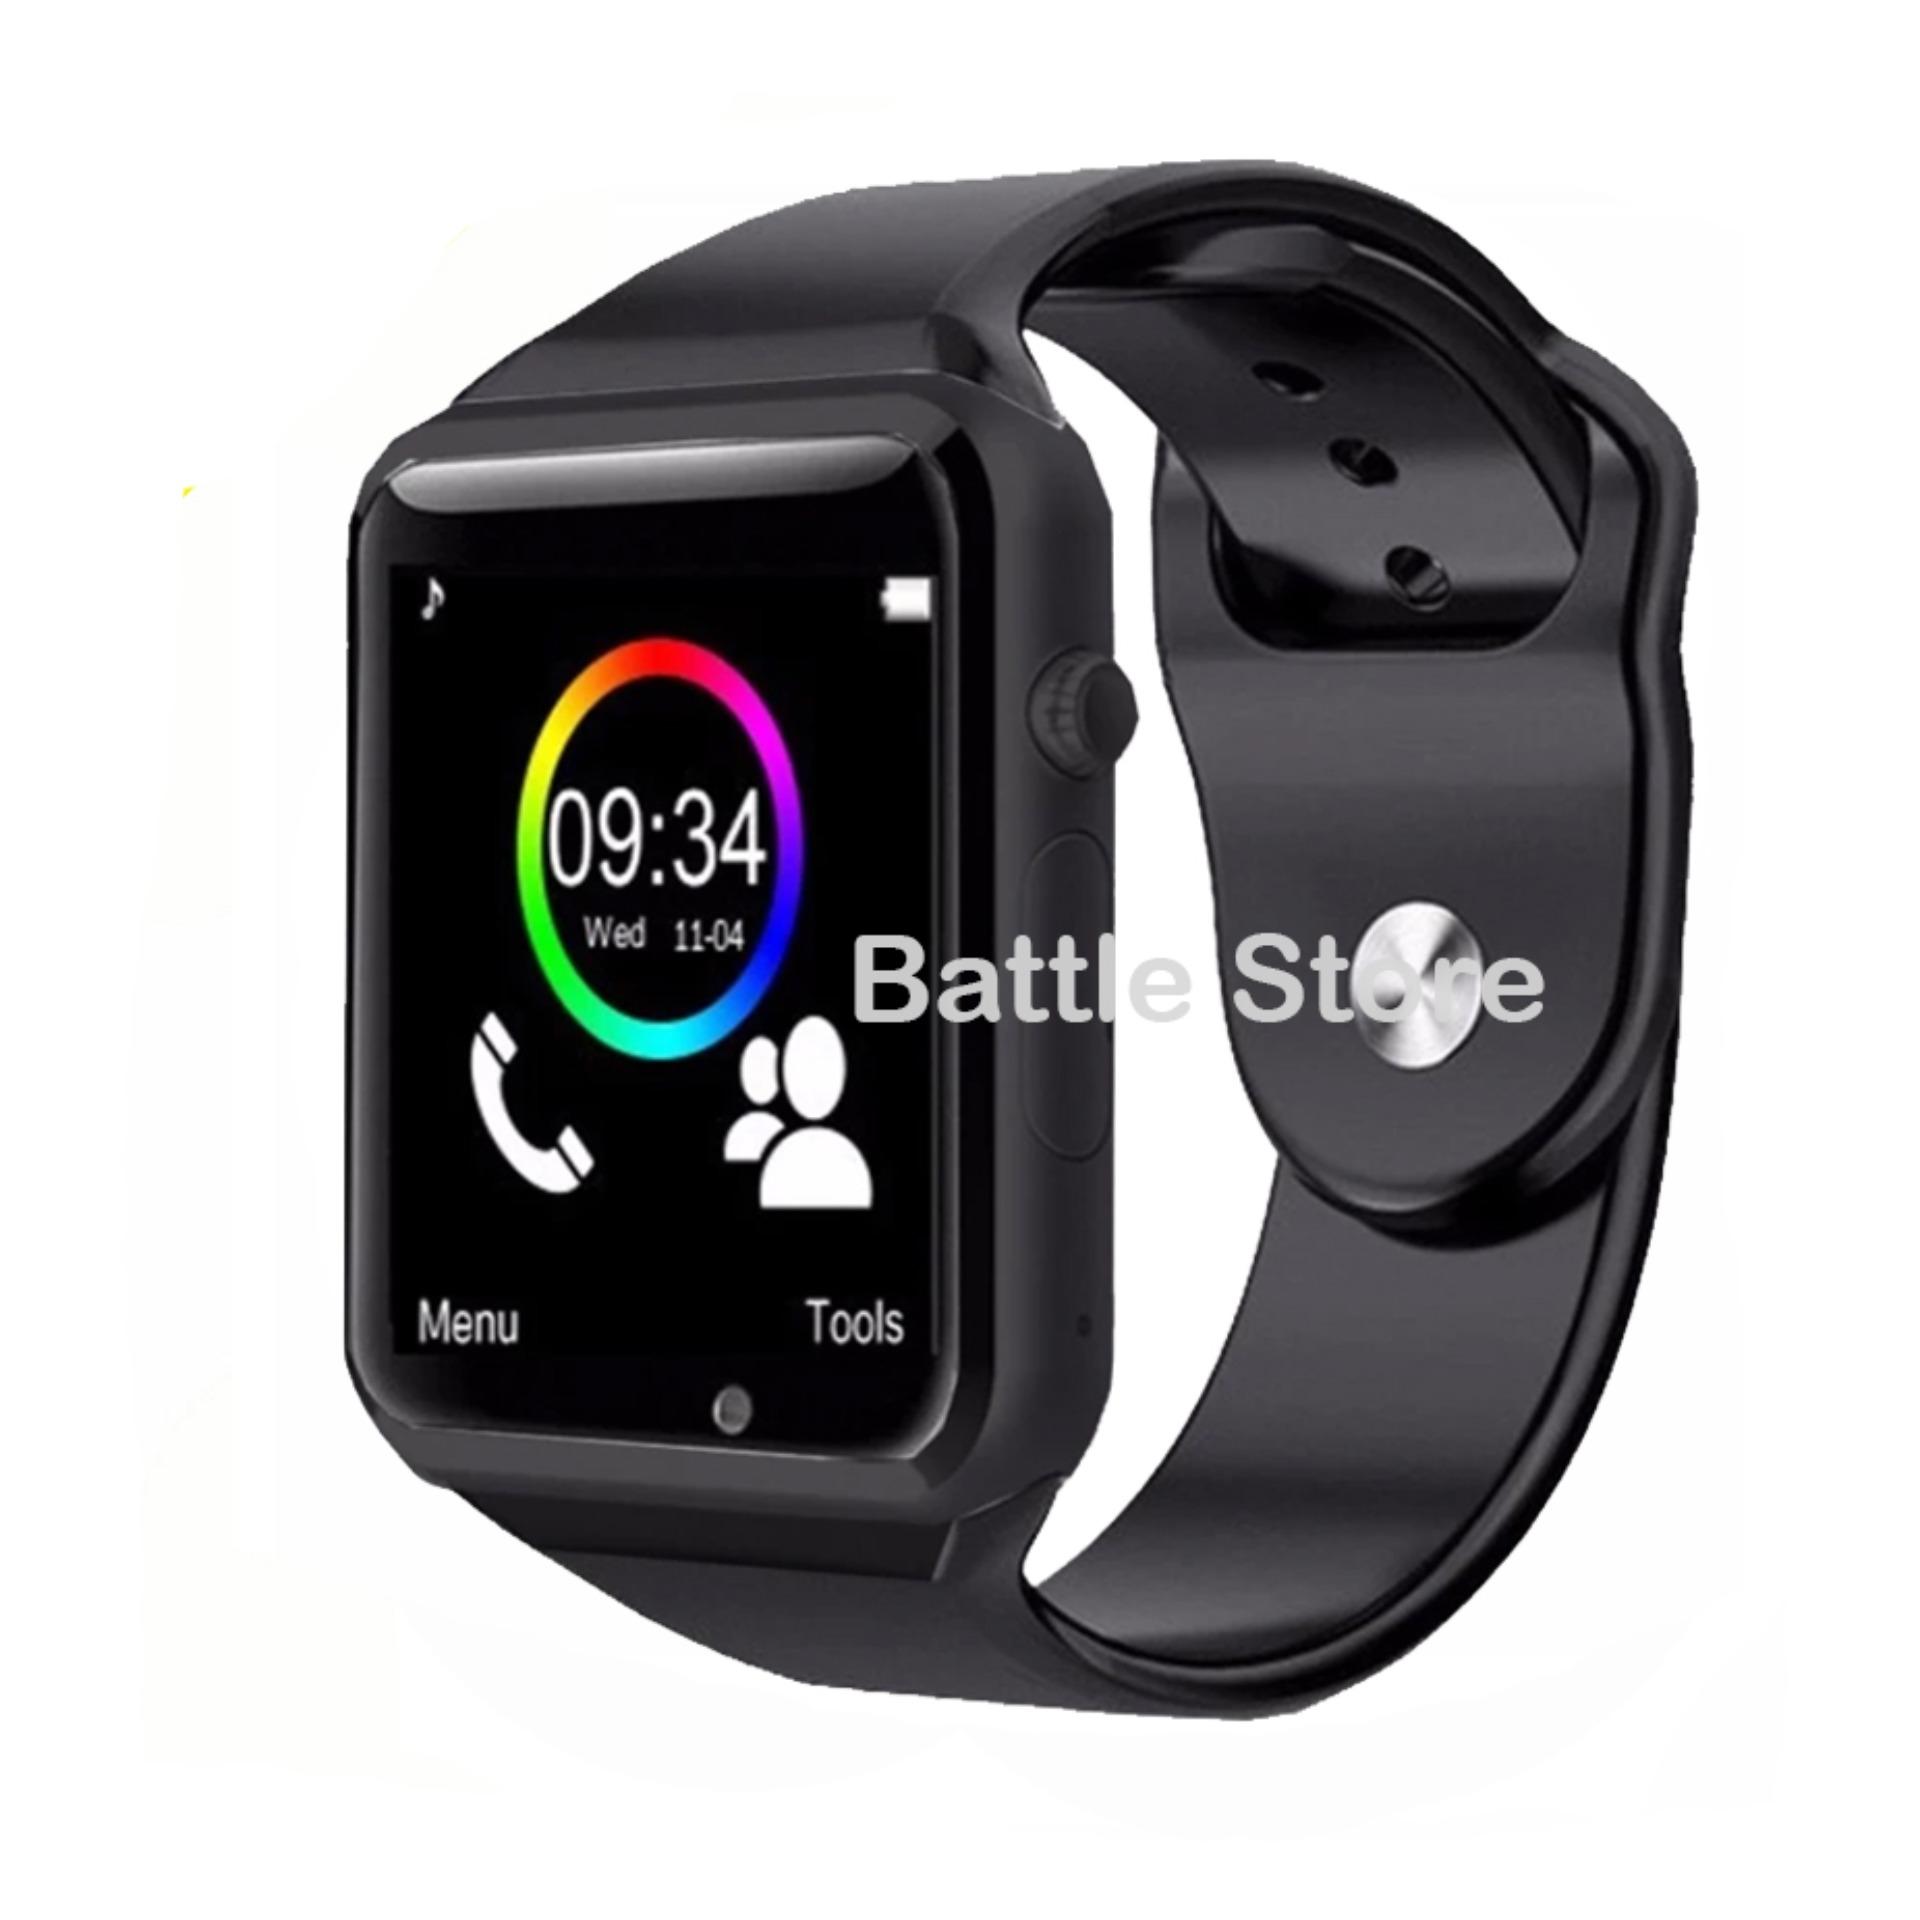 Android Smartwatch A1 Smart Watch U10 bluetooth watch international Sport Pedometer with SIM Camera For Android & Ios - Black